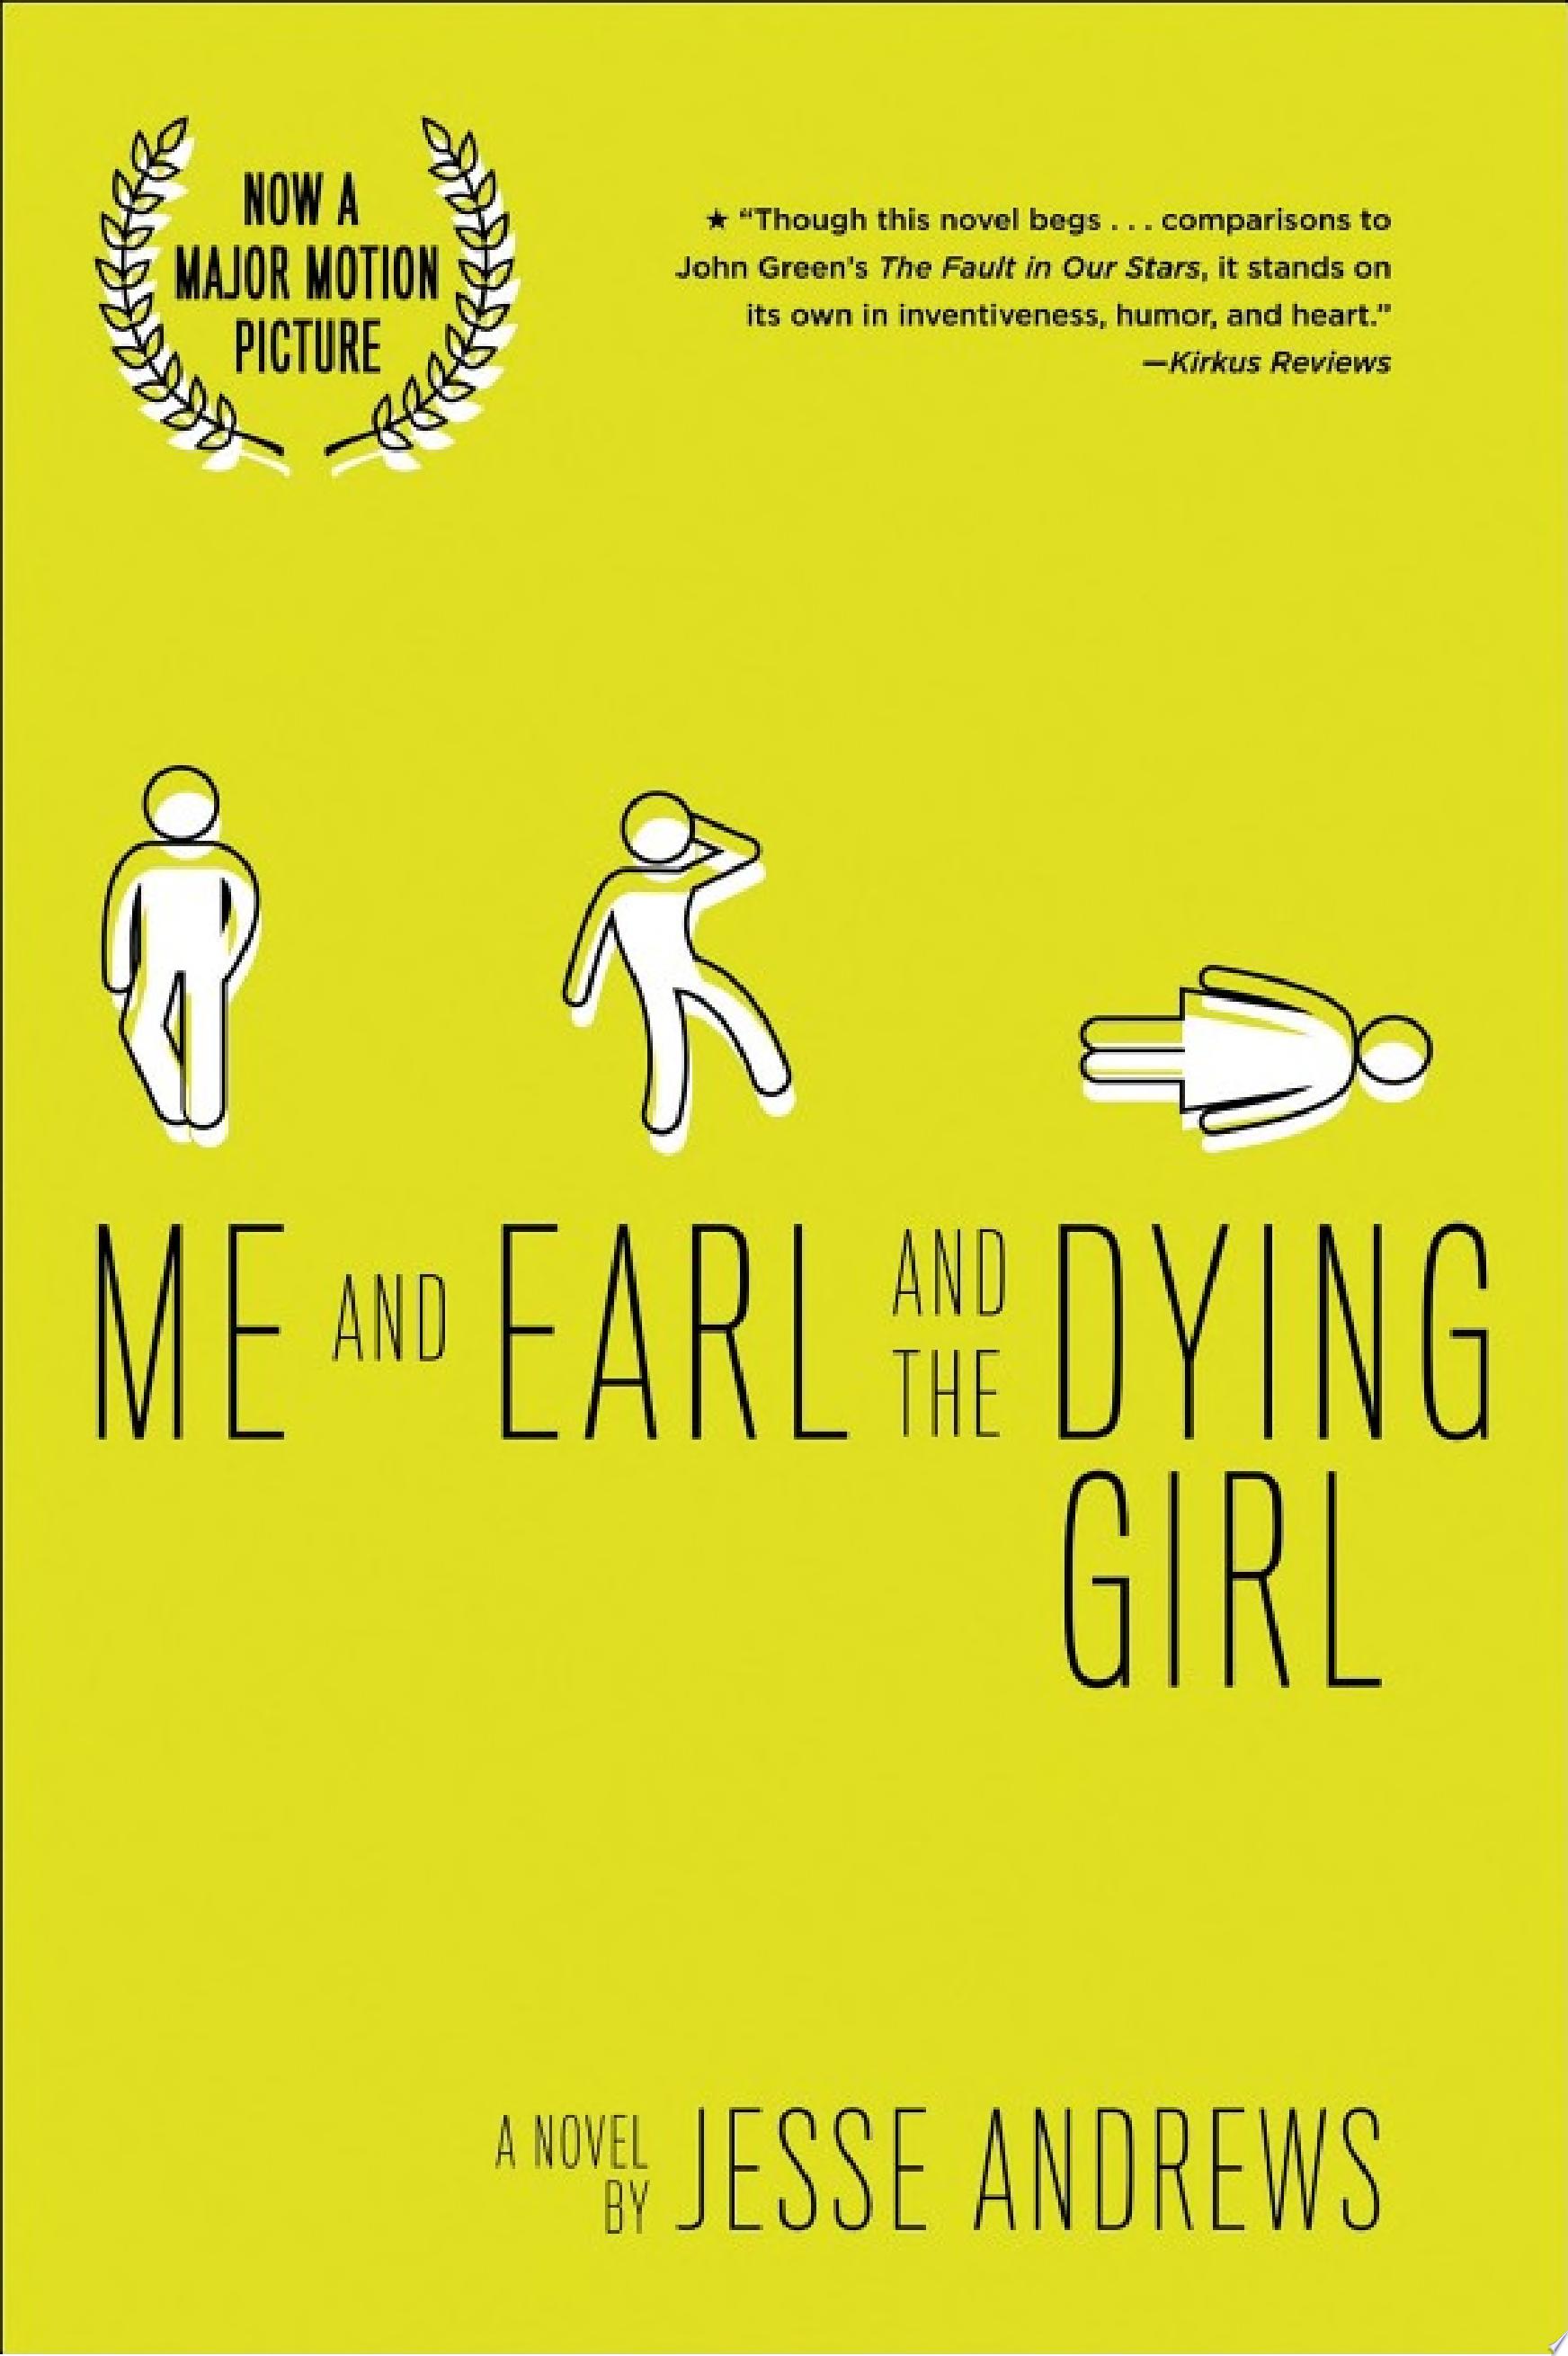 Image for "Me and Earl and the Dying Girl"